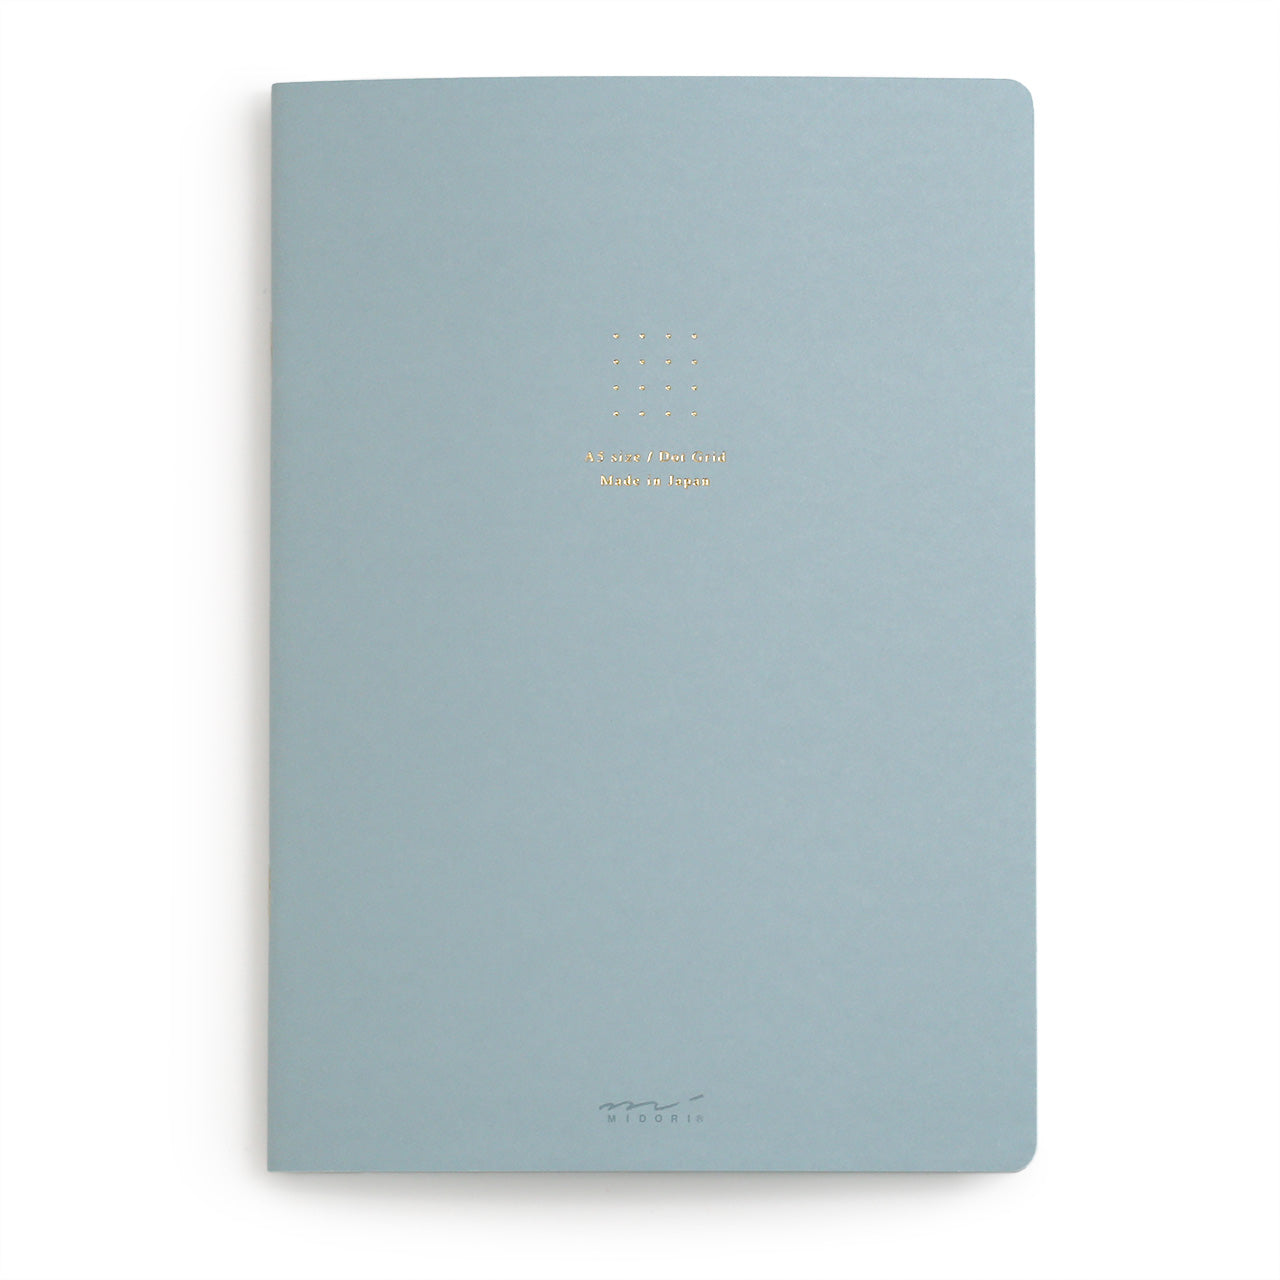 blue dot grid A5 notebook from midori with gold coloured foil stamping on the cover and gold coloured staples